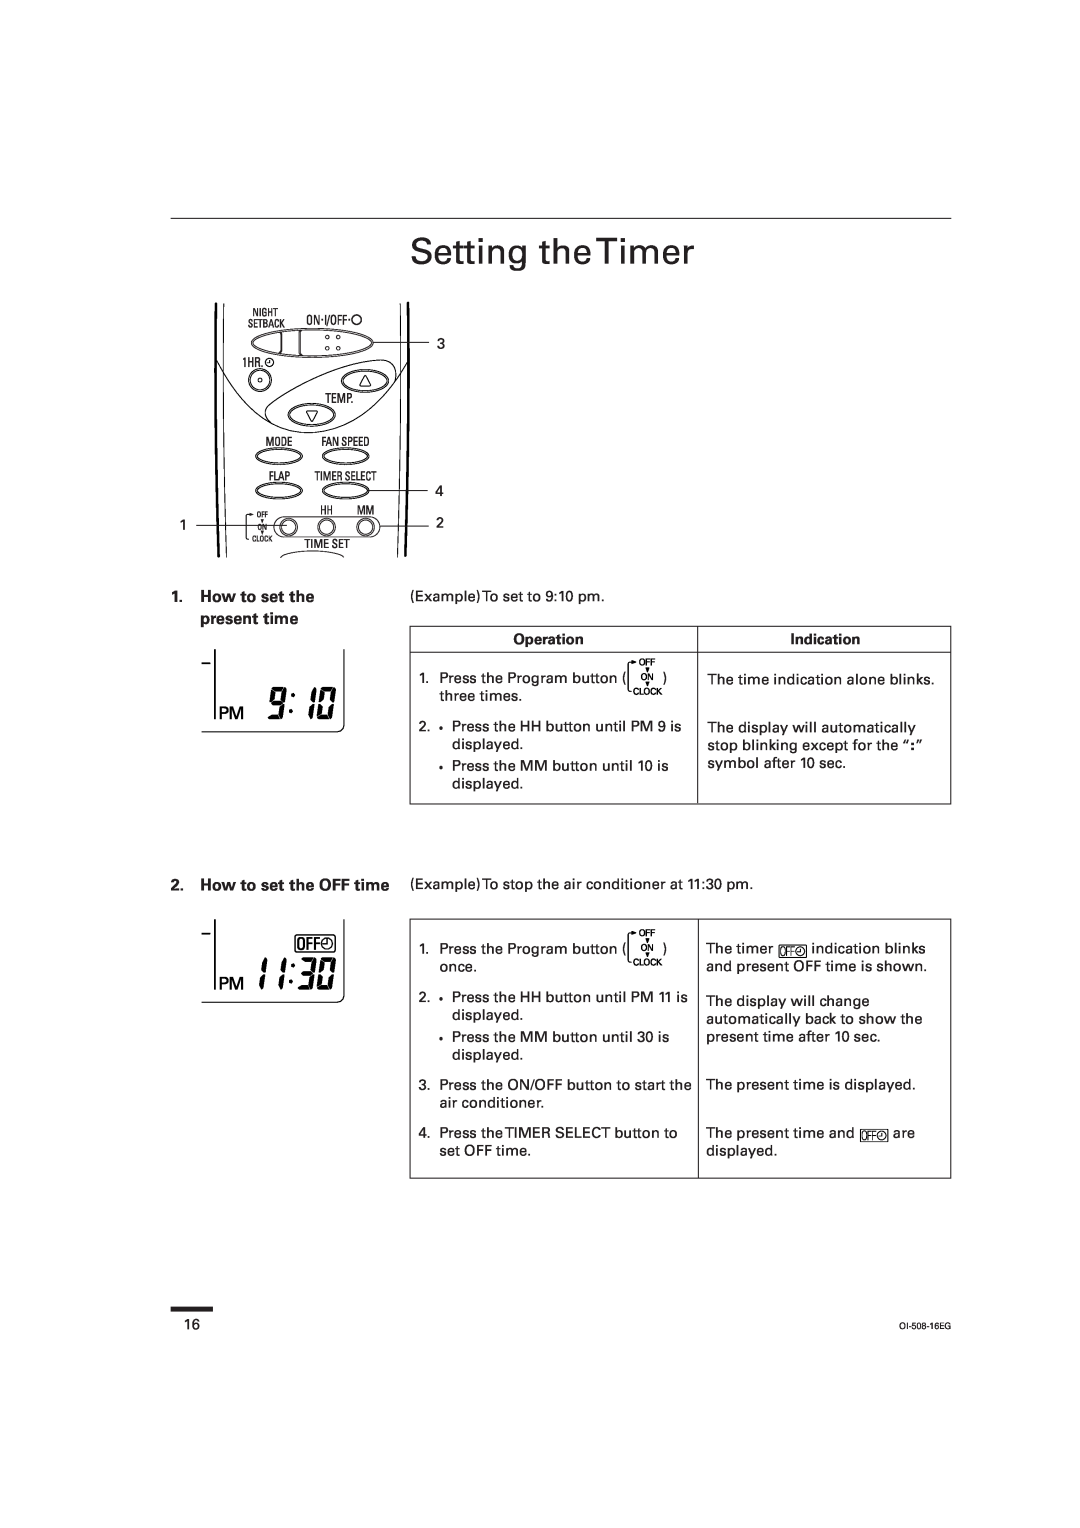 Sanyo KS2462R instruction manual Setting theTimer, How to set the present time, Operation, Indication 